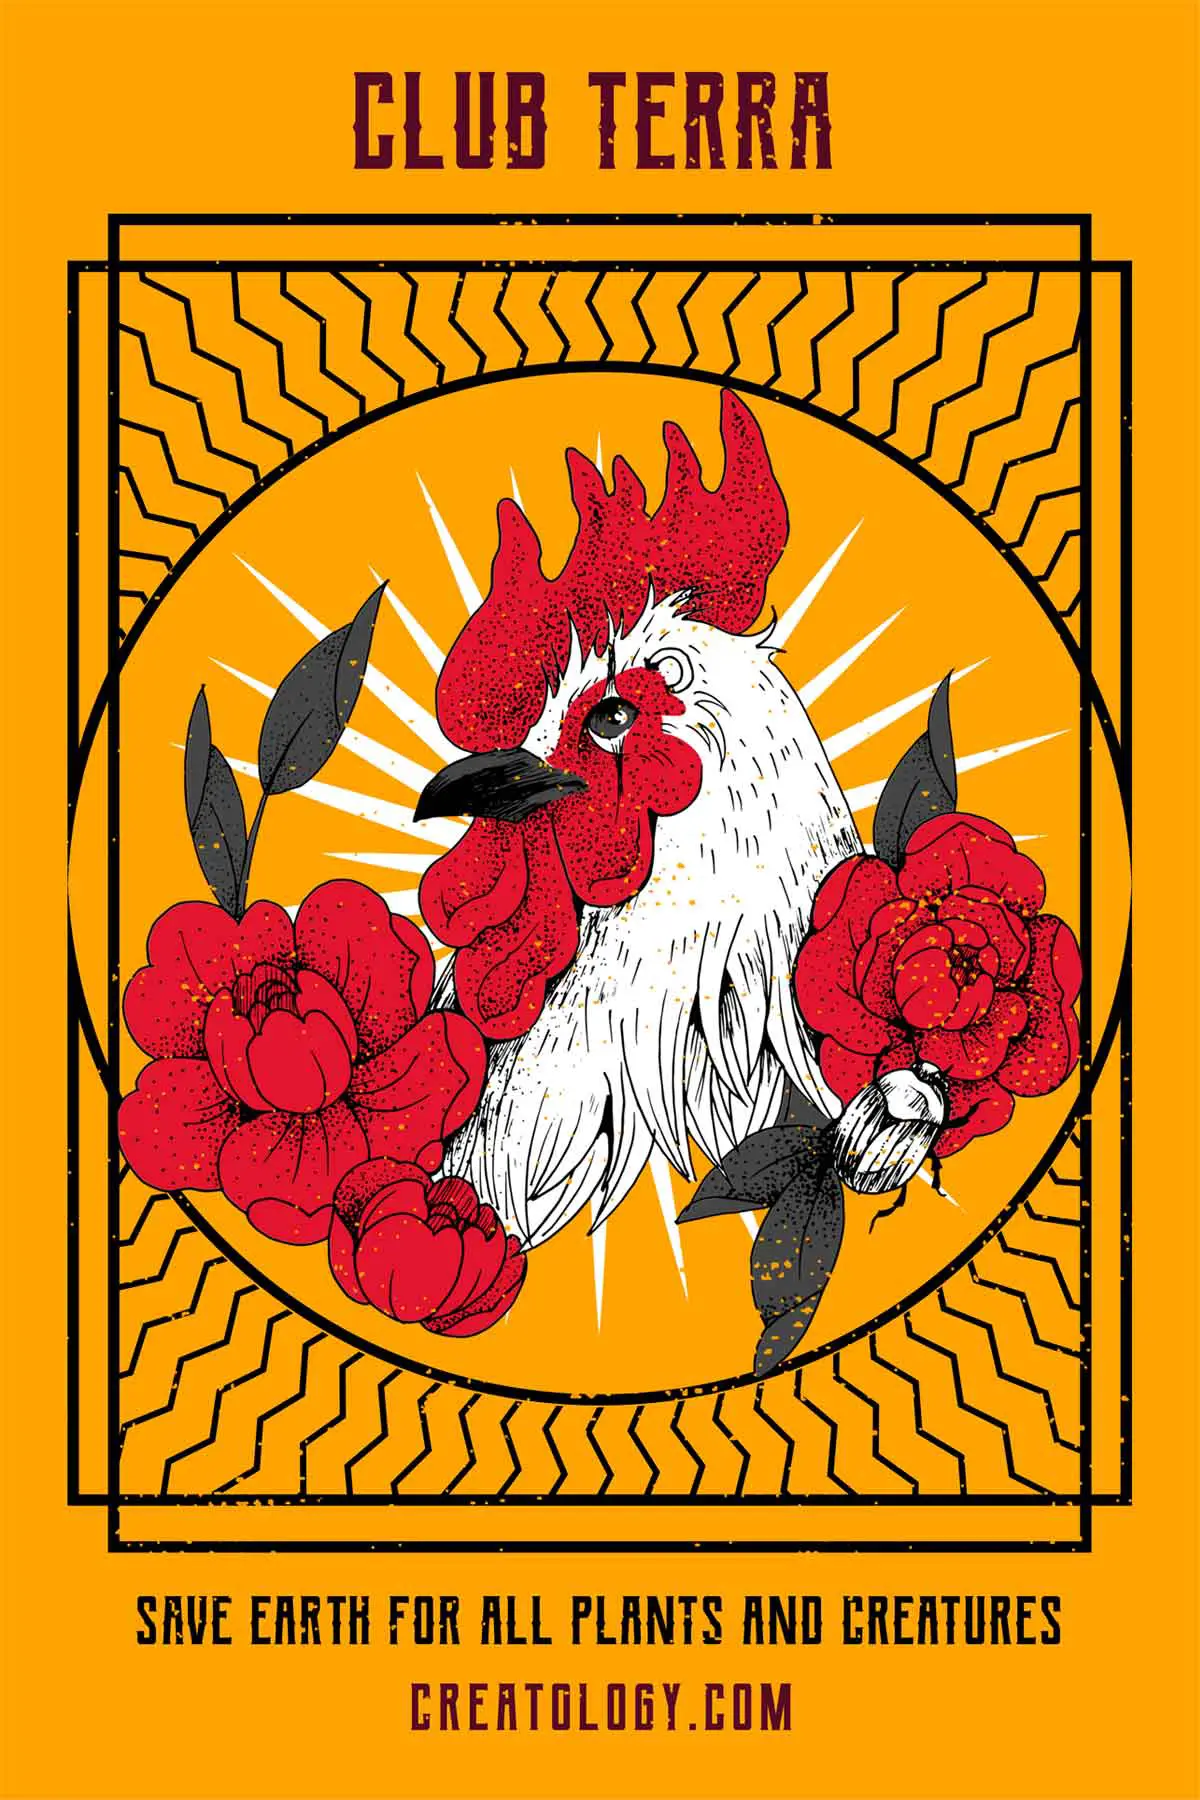 A rooster, roses, and flowers are framed by embellishments and text messages, poster style: “Save Earth – for all Earth creatures – All of us” and “Creatology.com”